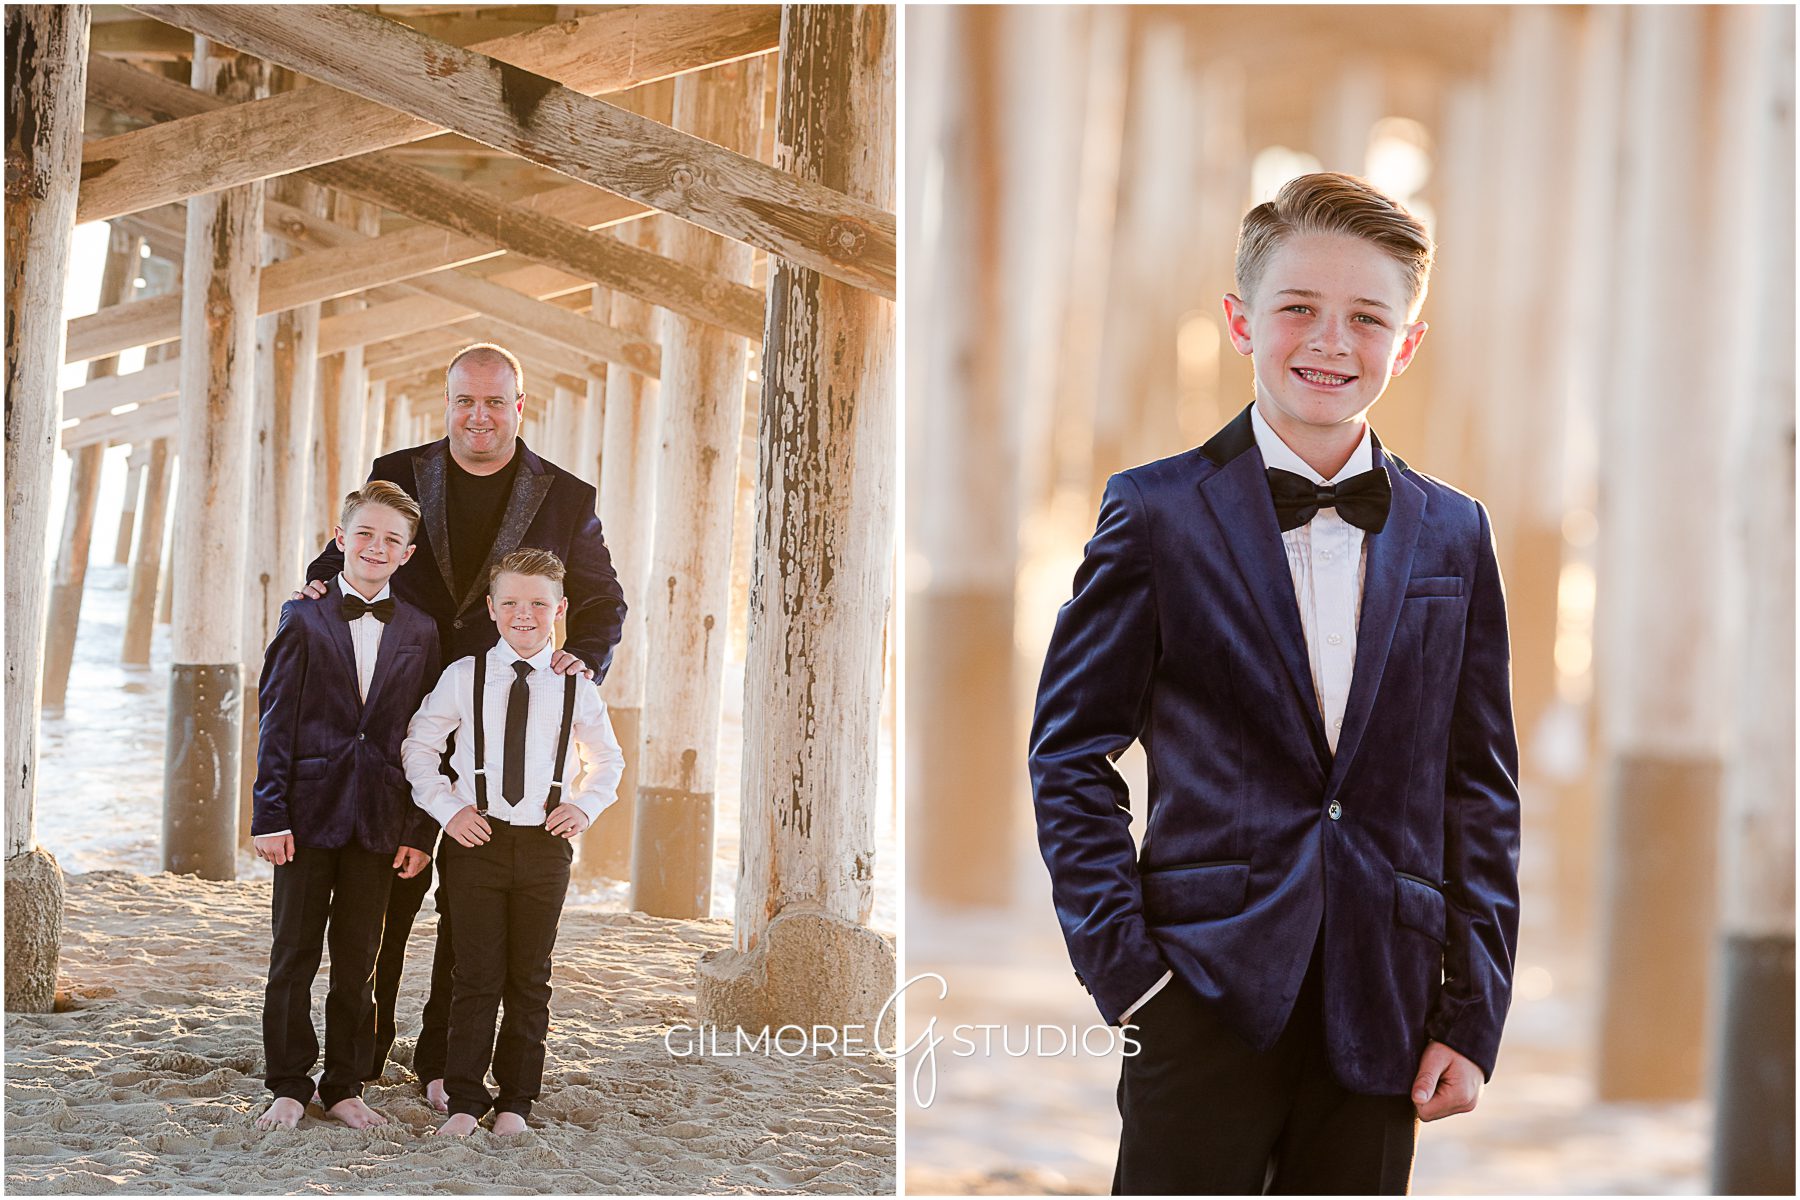 father with sons, children's photo, pose, outdoors, beach, ocean, pier, sand, daddy, boys, Formal Family Portrait, Newport Beach photographer